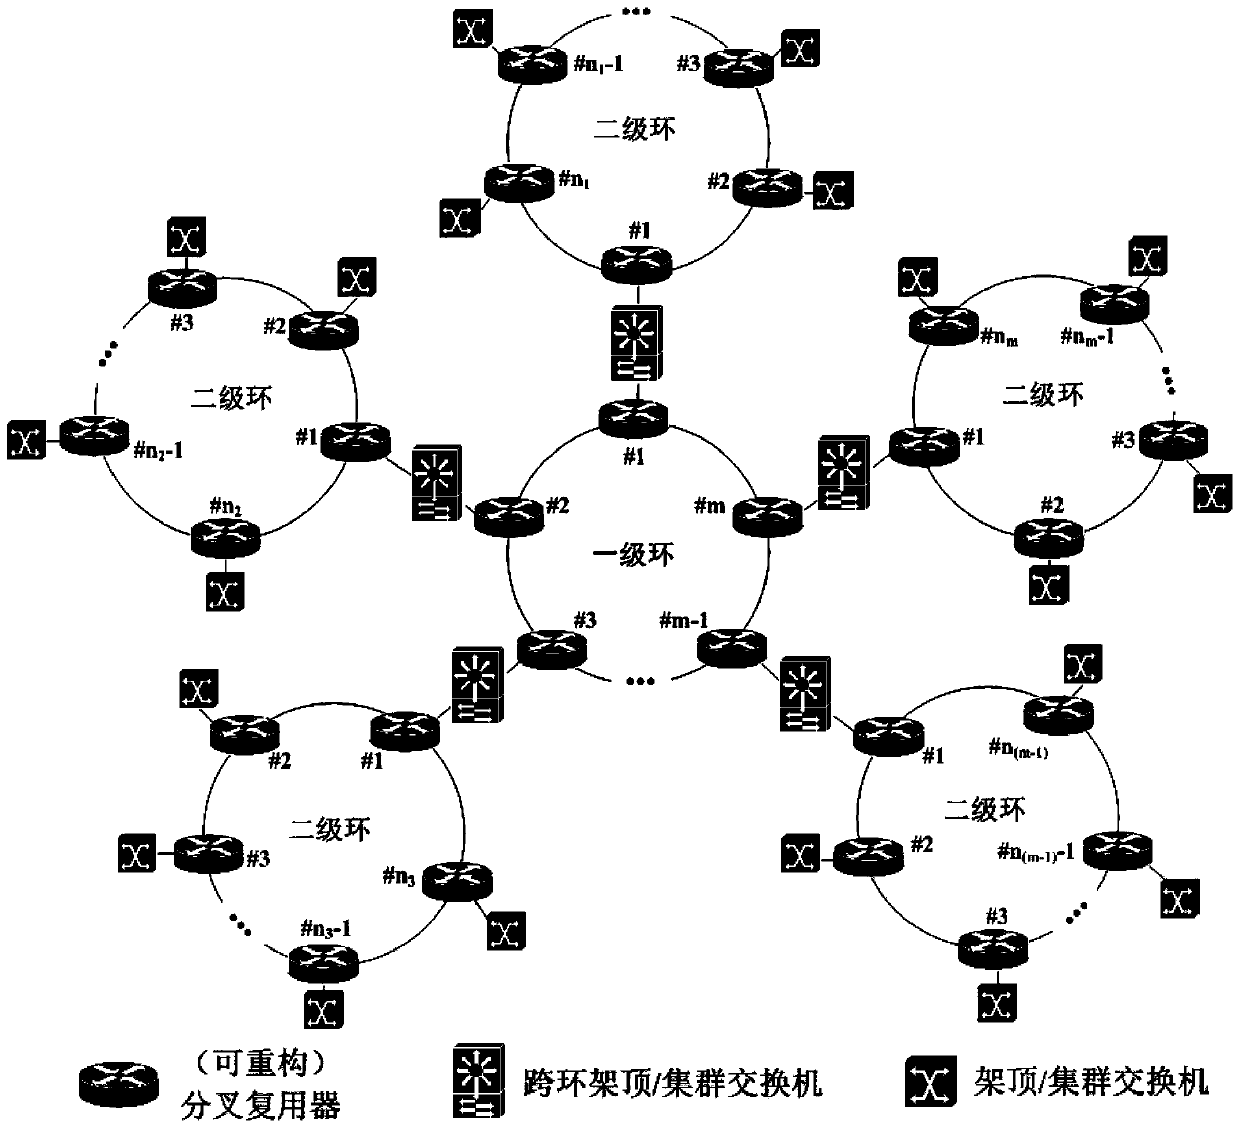 A Multi-level Wavelength Division Multiplexing Ring Optical Network